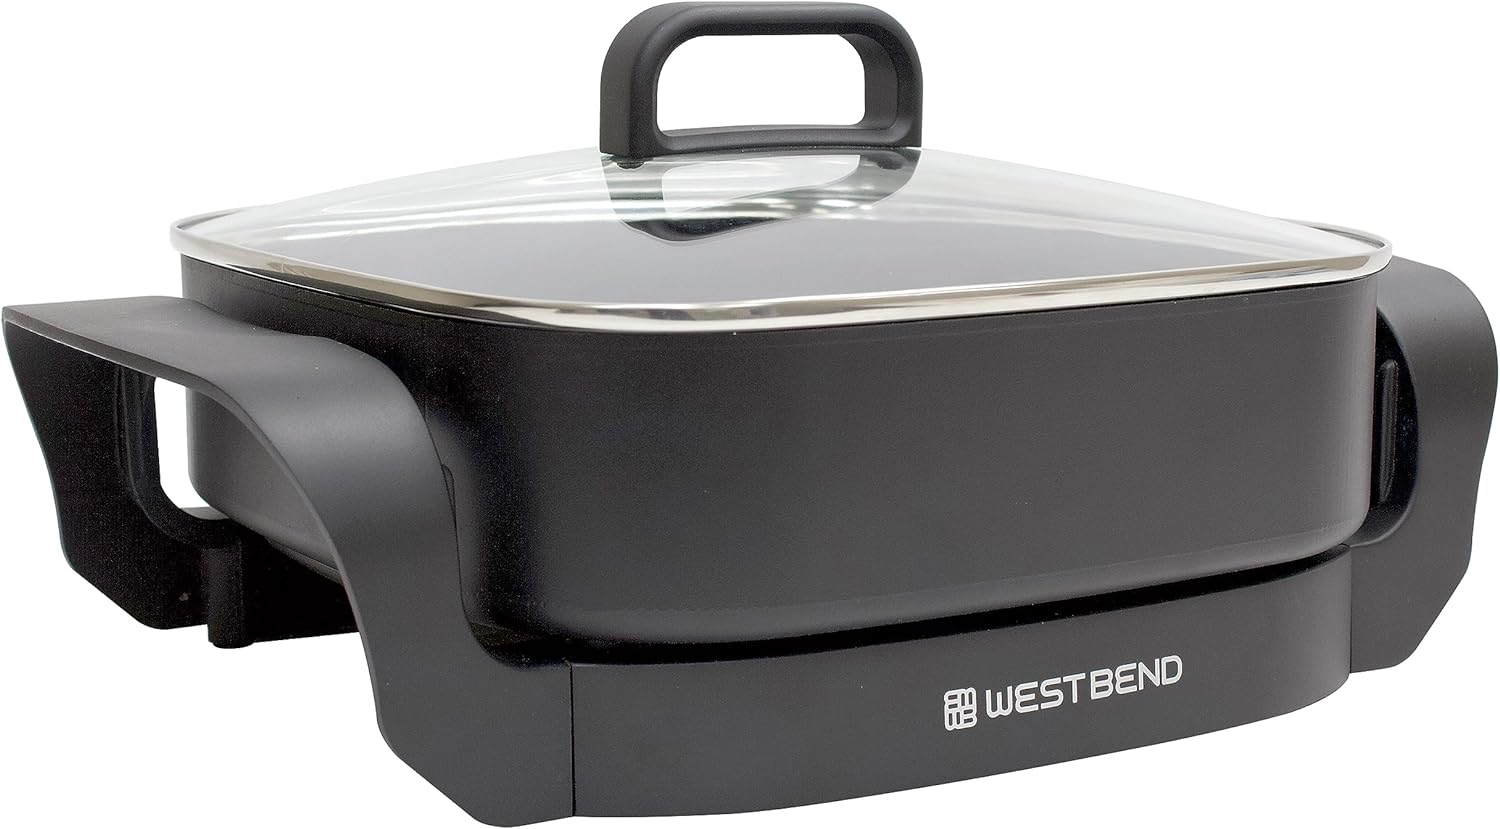 West Bend 12-Inch Electric Skillet with Non-Stick Coating (90 Days Warranty)